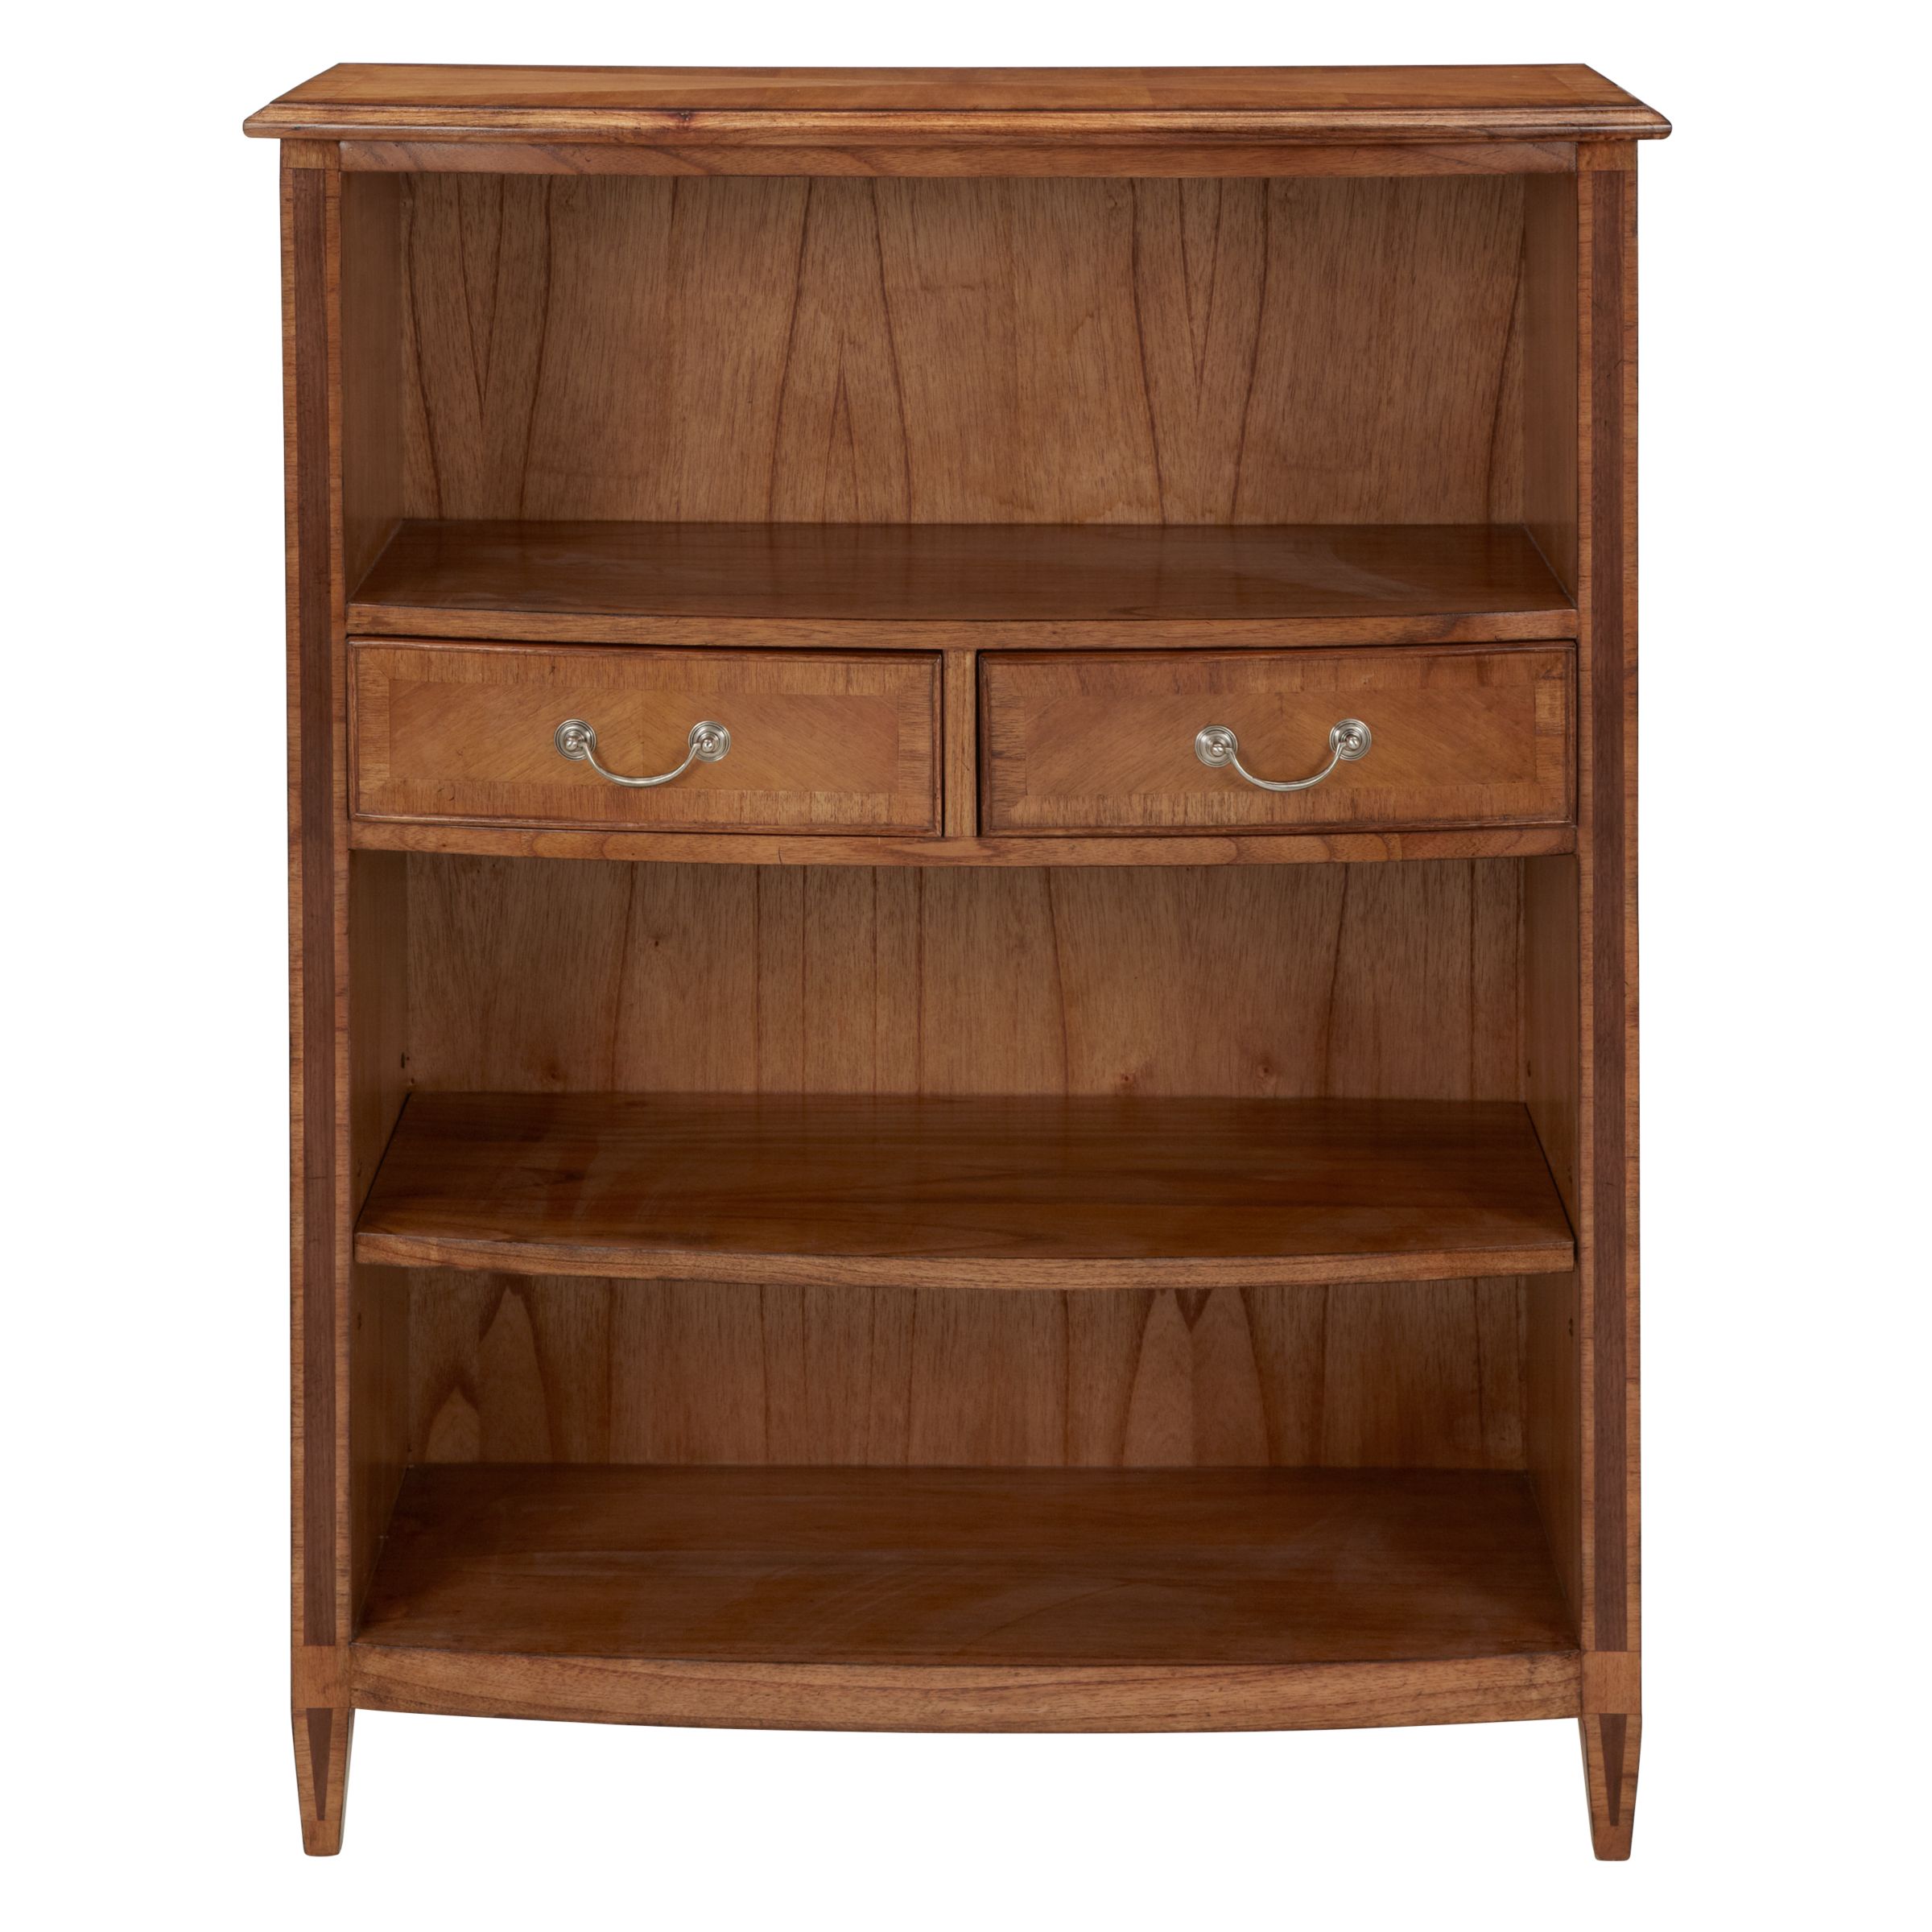 John Lewis Cameo Bow Fronted Bookcase At John Lewis Partners